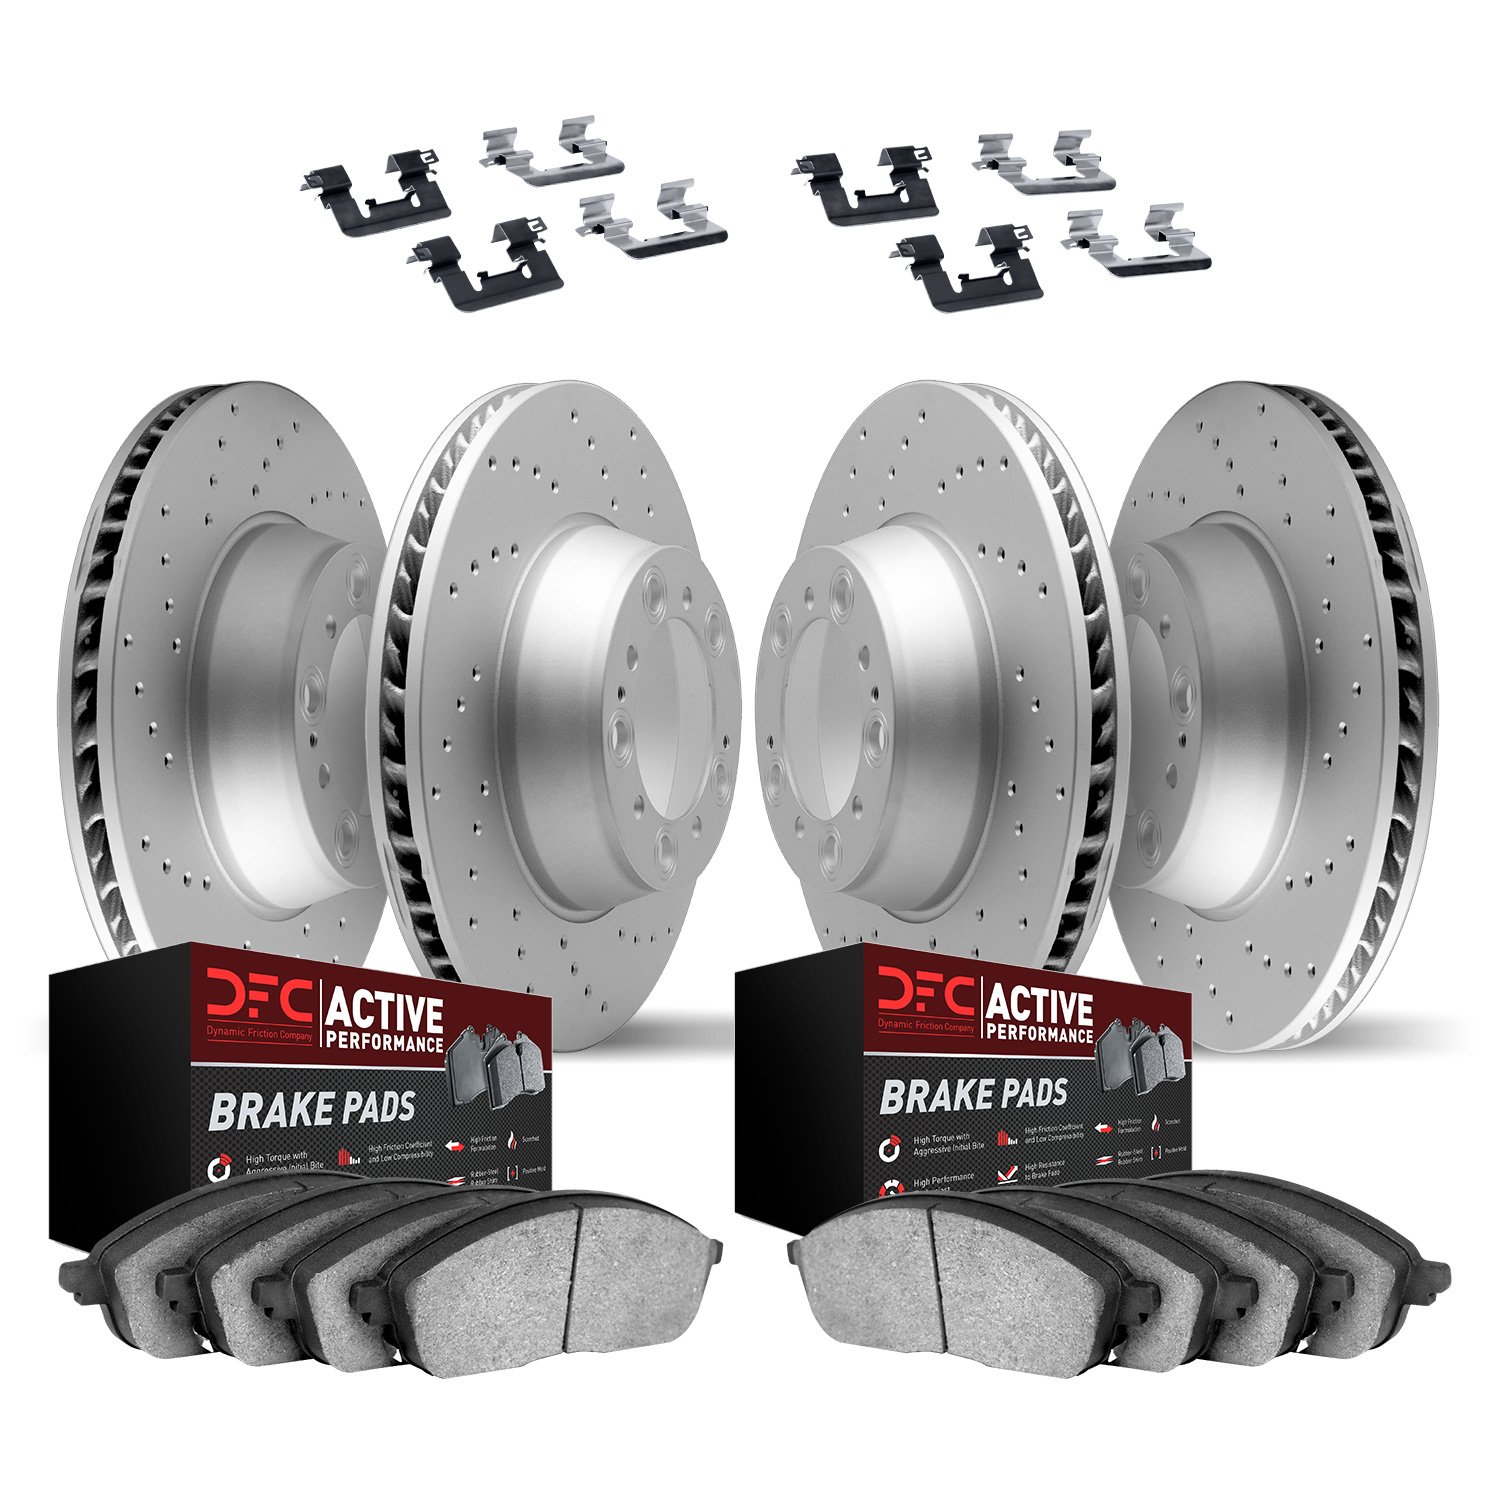 2714-74038 Geoperformance Drilled Brake Rotors with Active Performance Pads Kit & Hardware, 2003-2015 Multiple Makes/Models, Pos